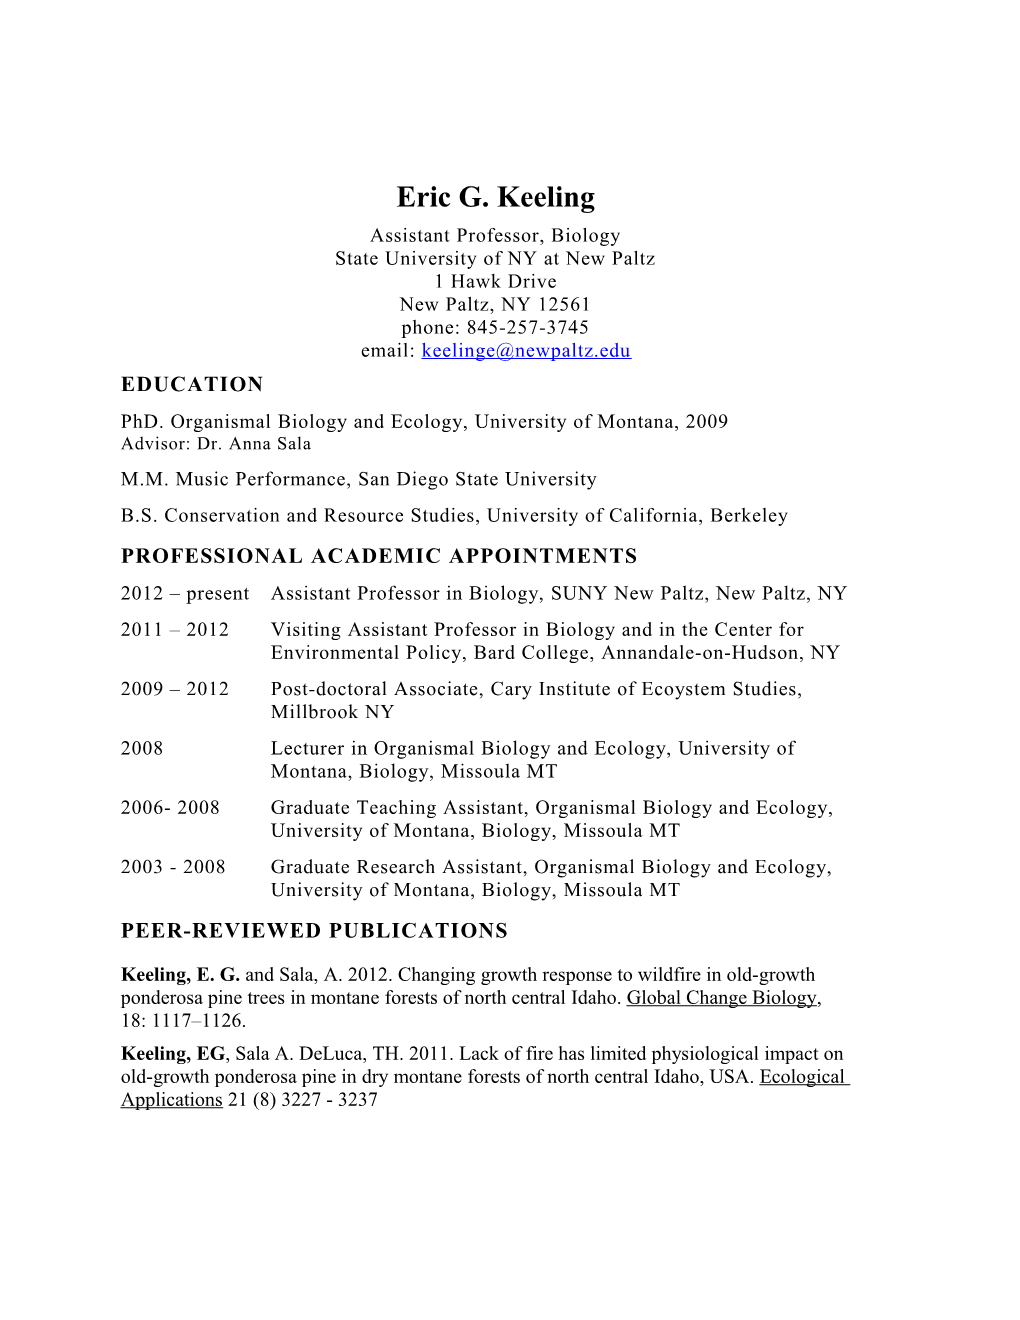 Eric G. Keeling PAGE 4 of 6